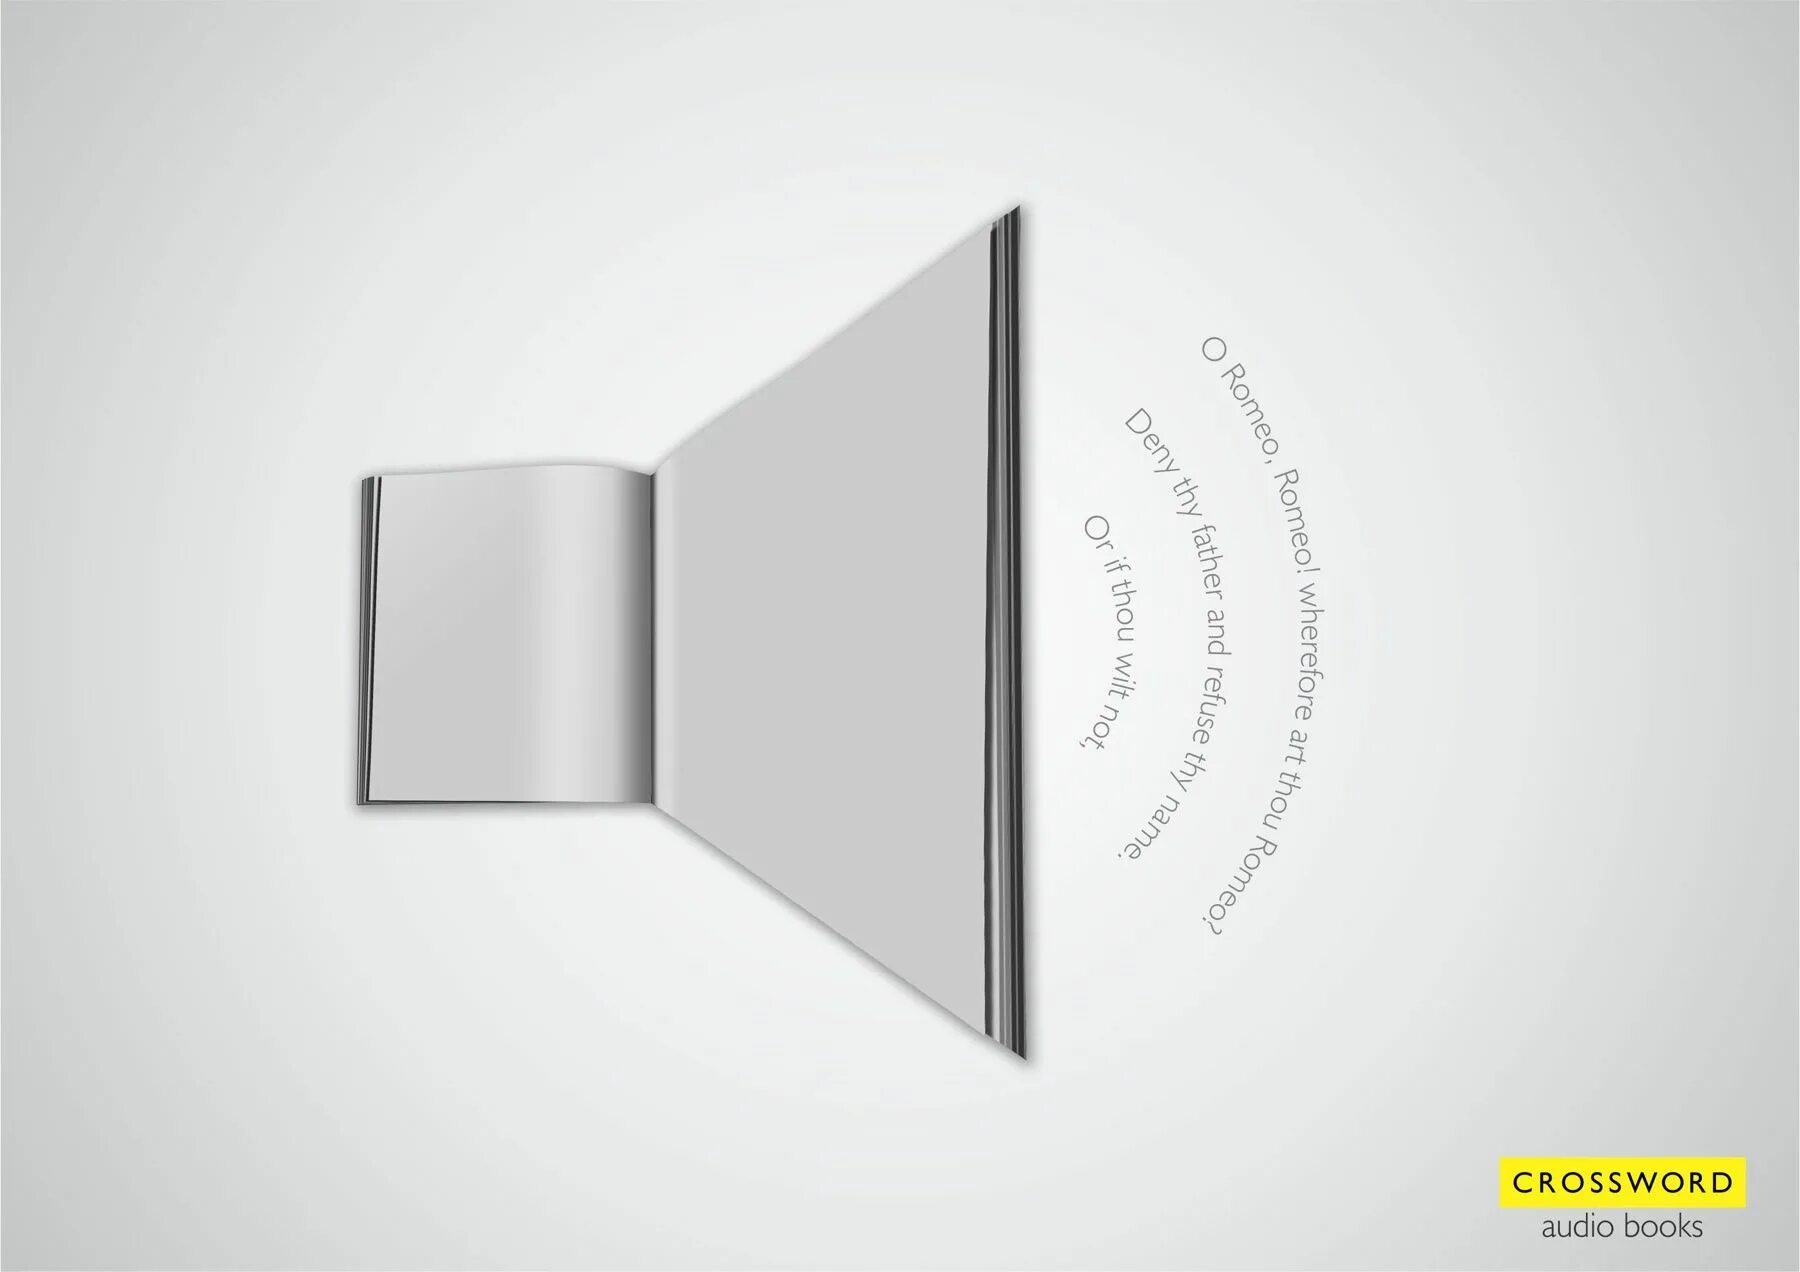 Appear book. Рекламные обложки книг. Book advertisement. Advertising booklet. Advertising book with SS Grids.